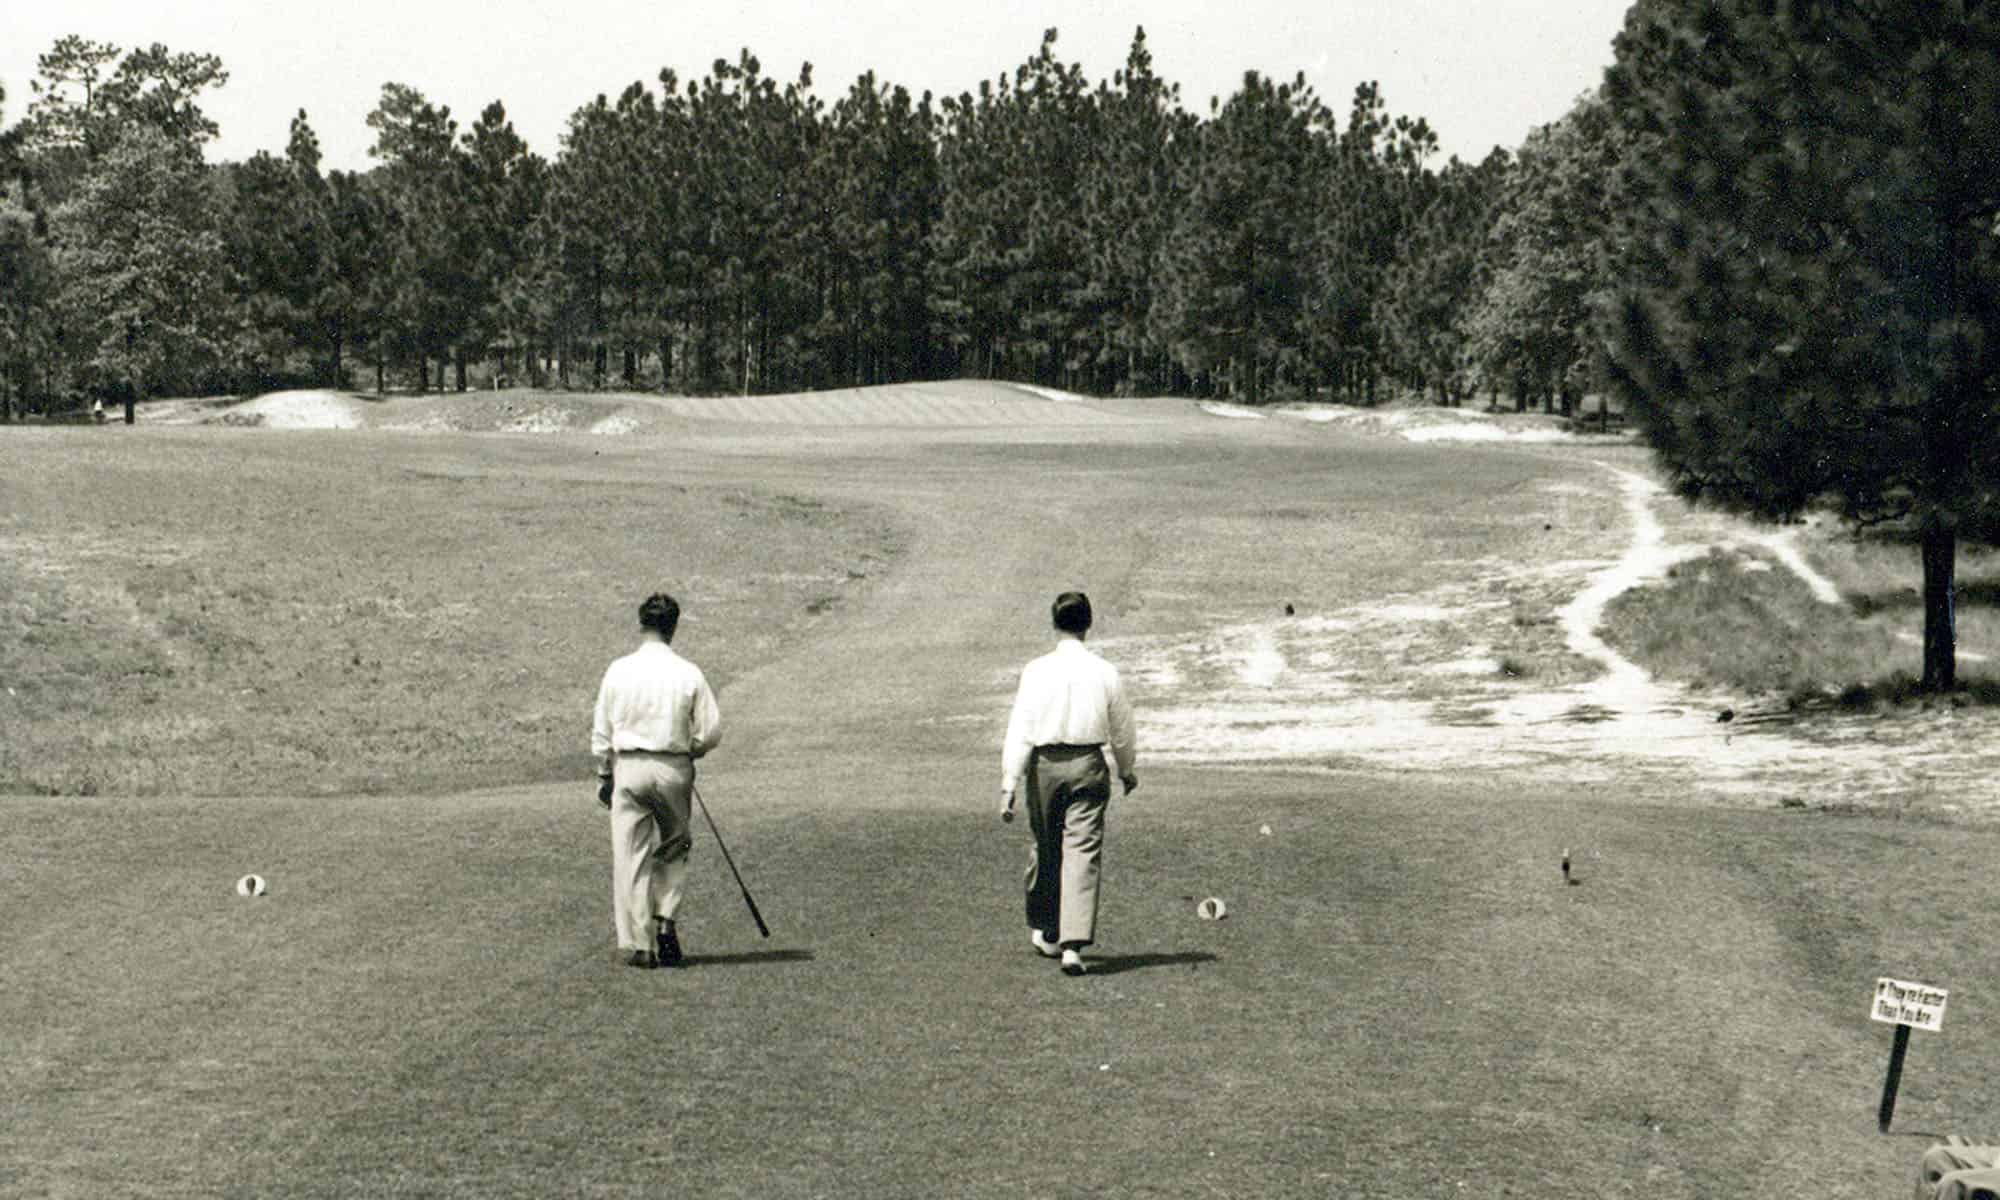 The 6th hole of Pinehurst No. 2 in the mid-1940s.